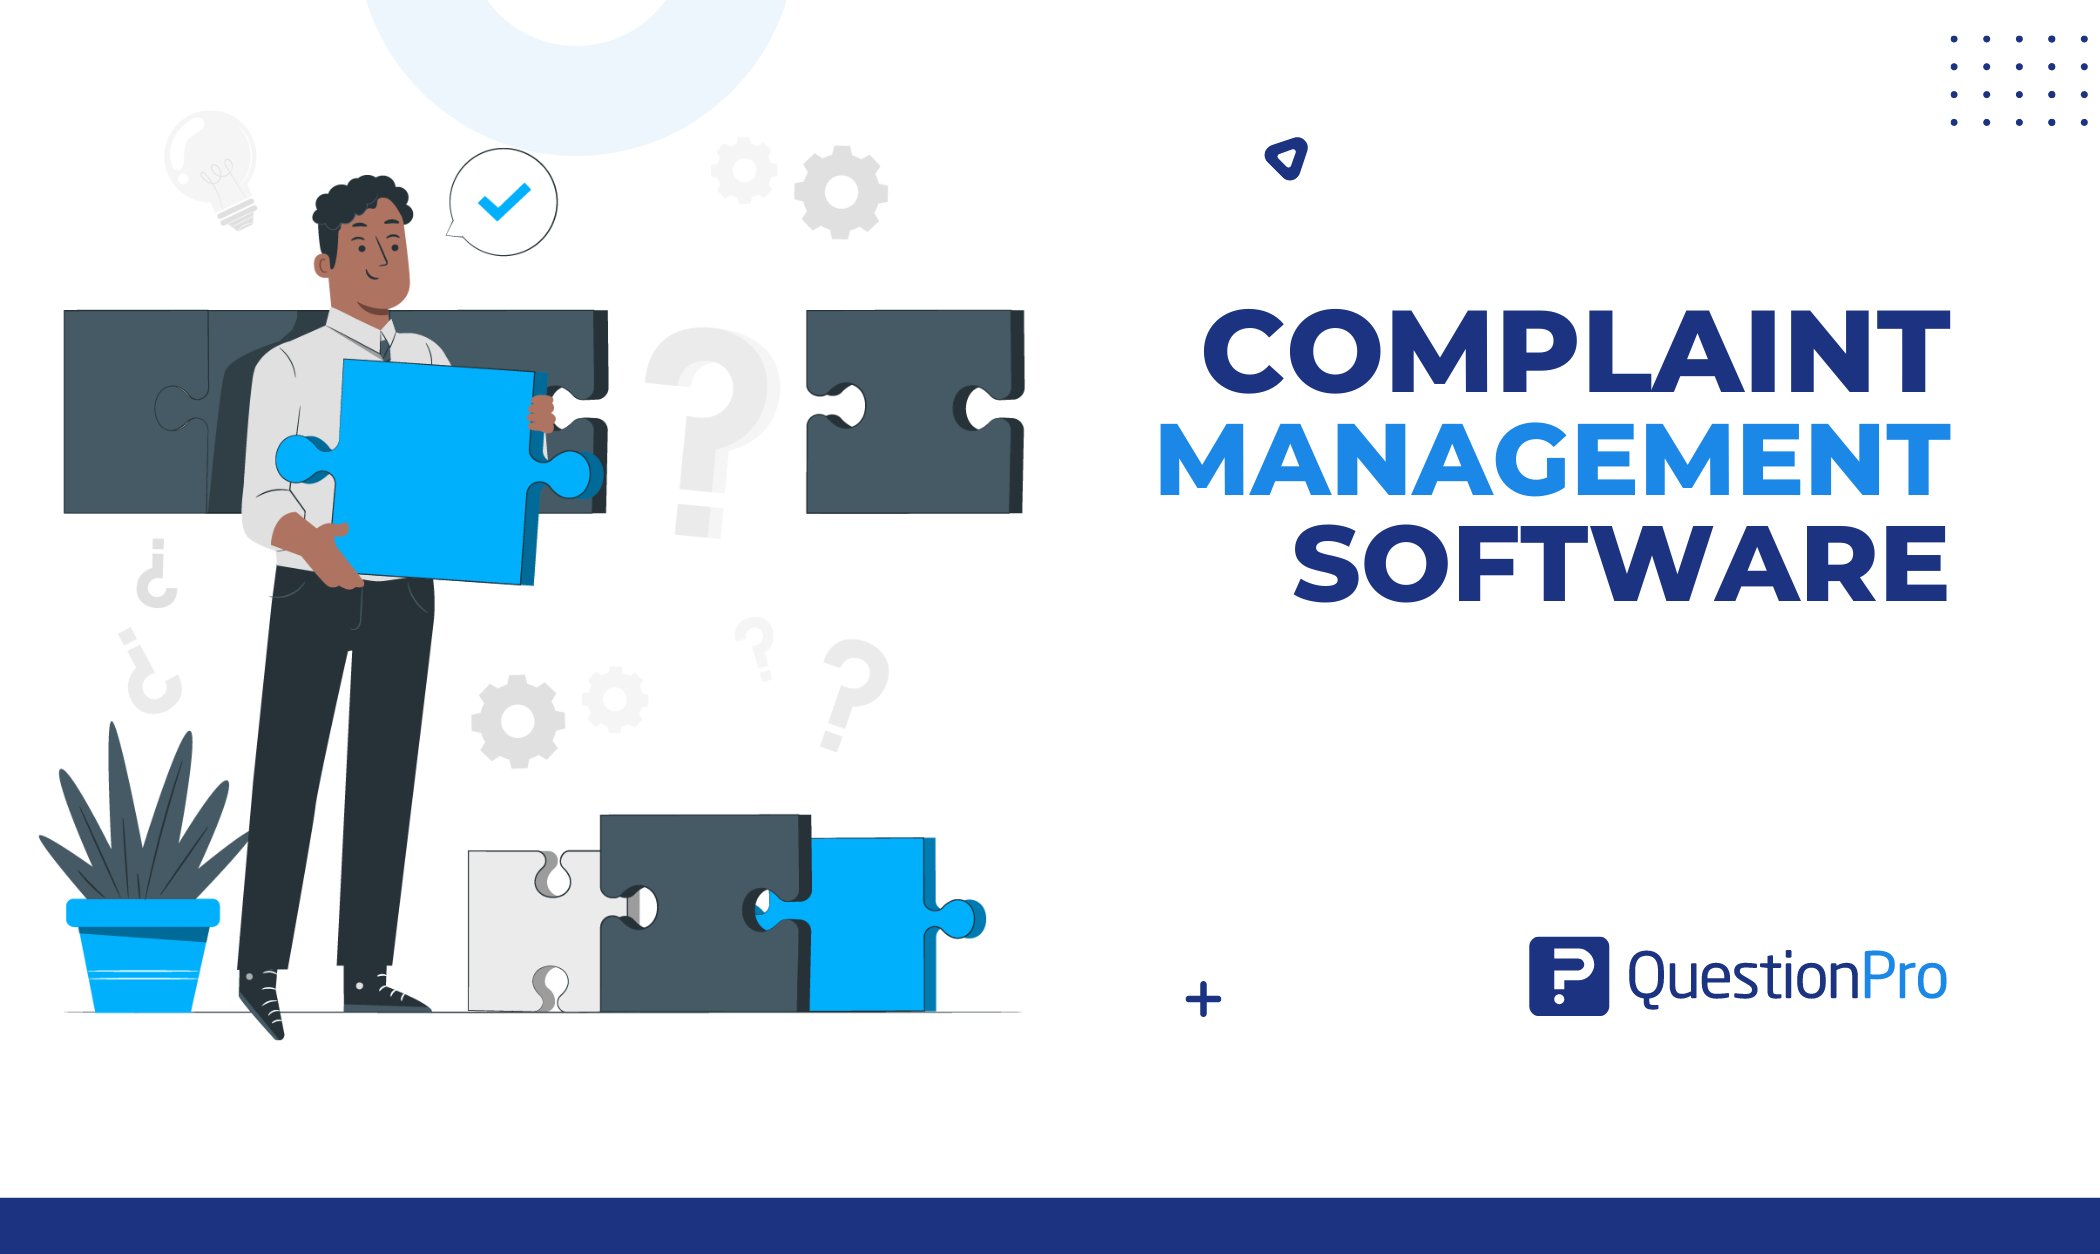 Complaint Management Software makes it easier to deal with customer complaints and improves happiness. Streamline processes and fix problems.